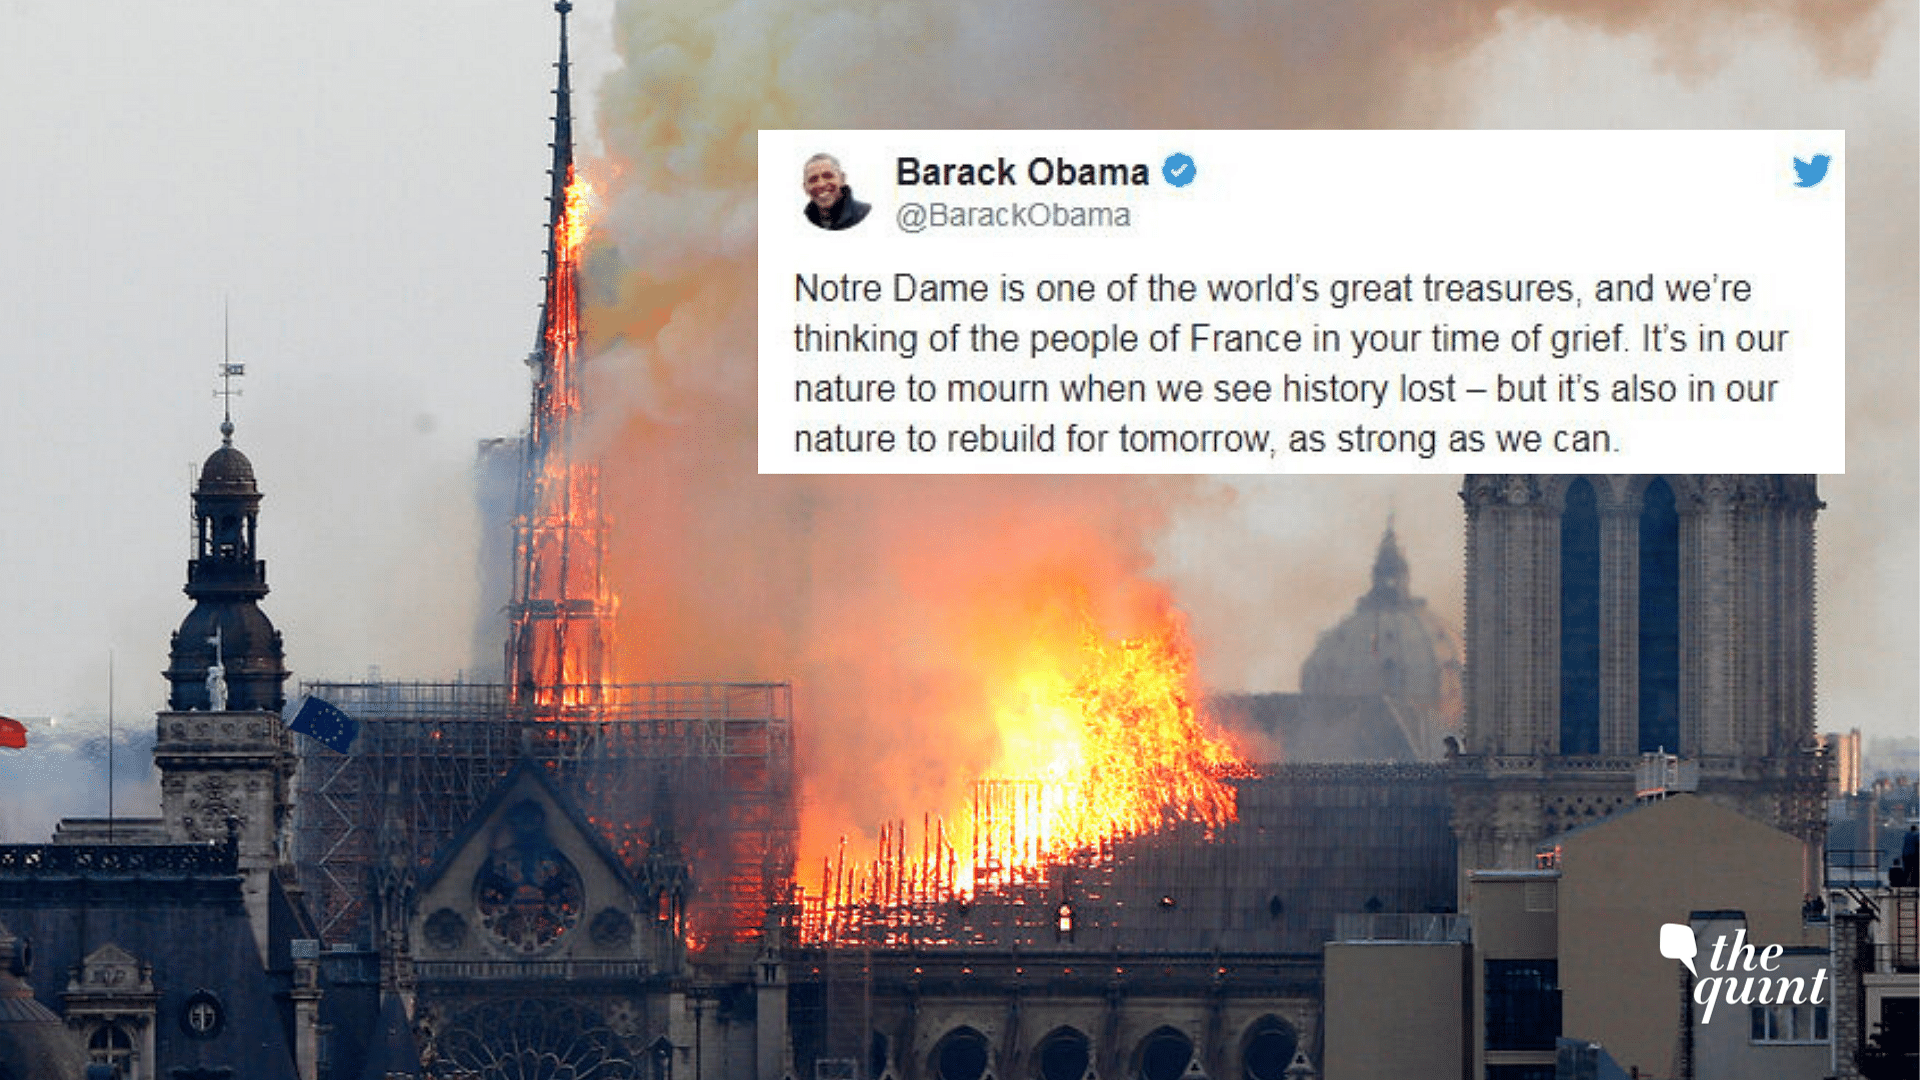  A catastrophic fire engulfed the upper reaches of Paris’ soaring Notre Dame Cathedral. 